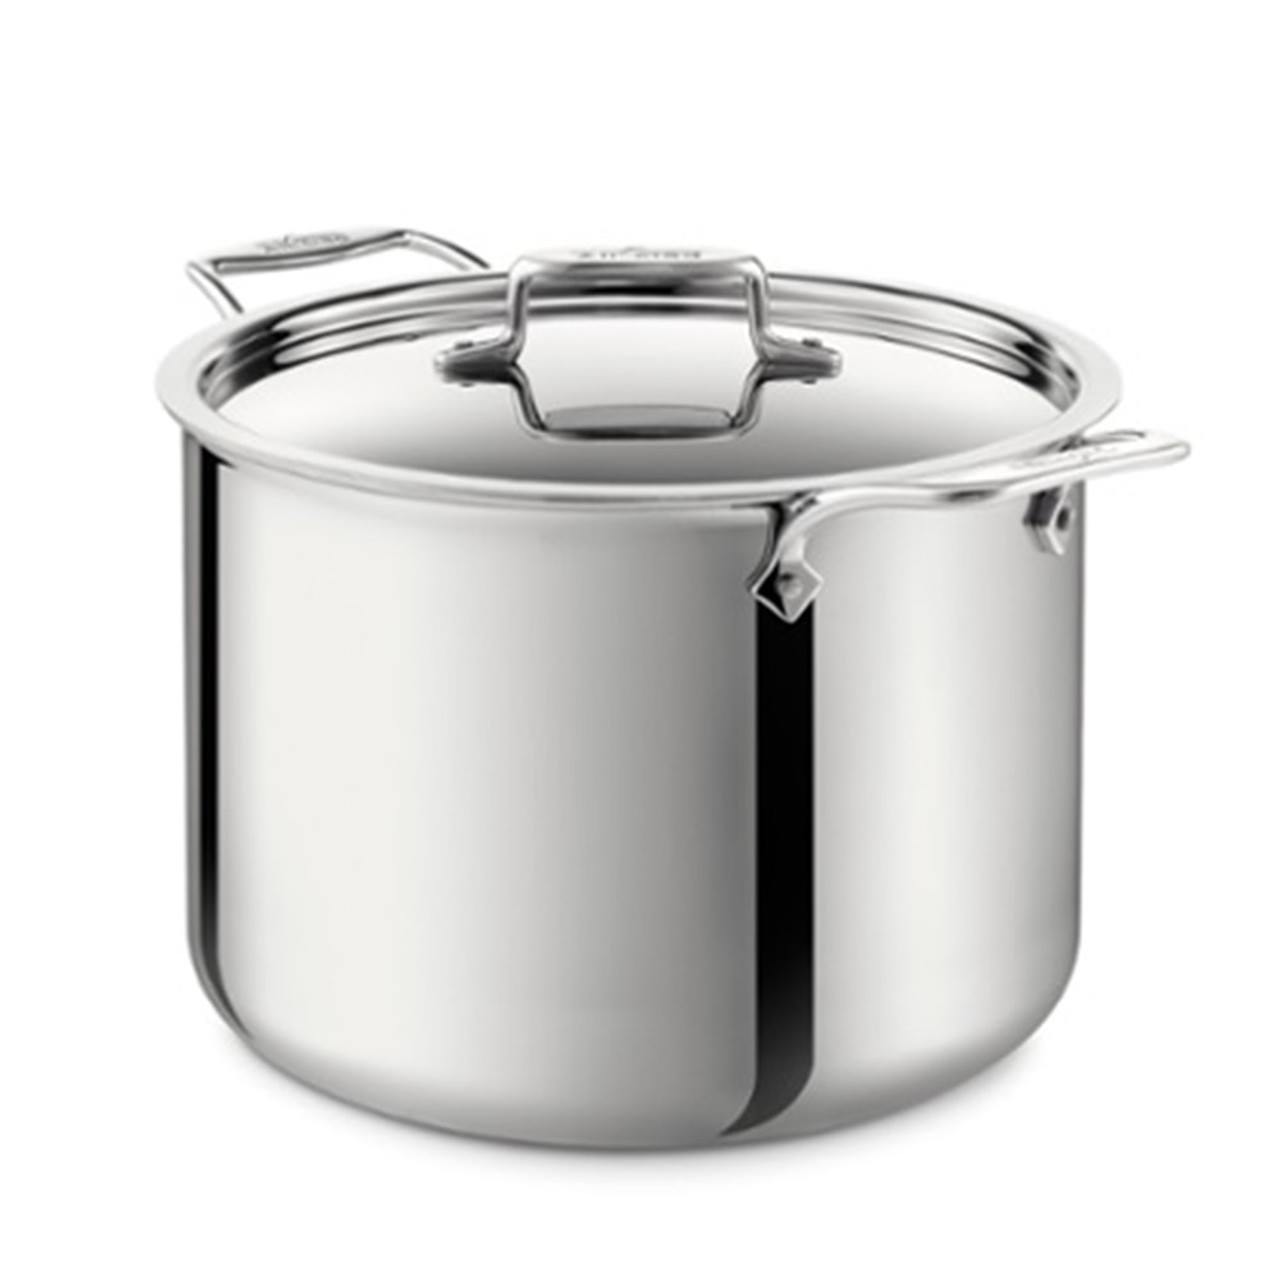 All-Clad D5 Brushed Stainless-Steel 4 qt and 2 qt Sauce Pan Set